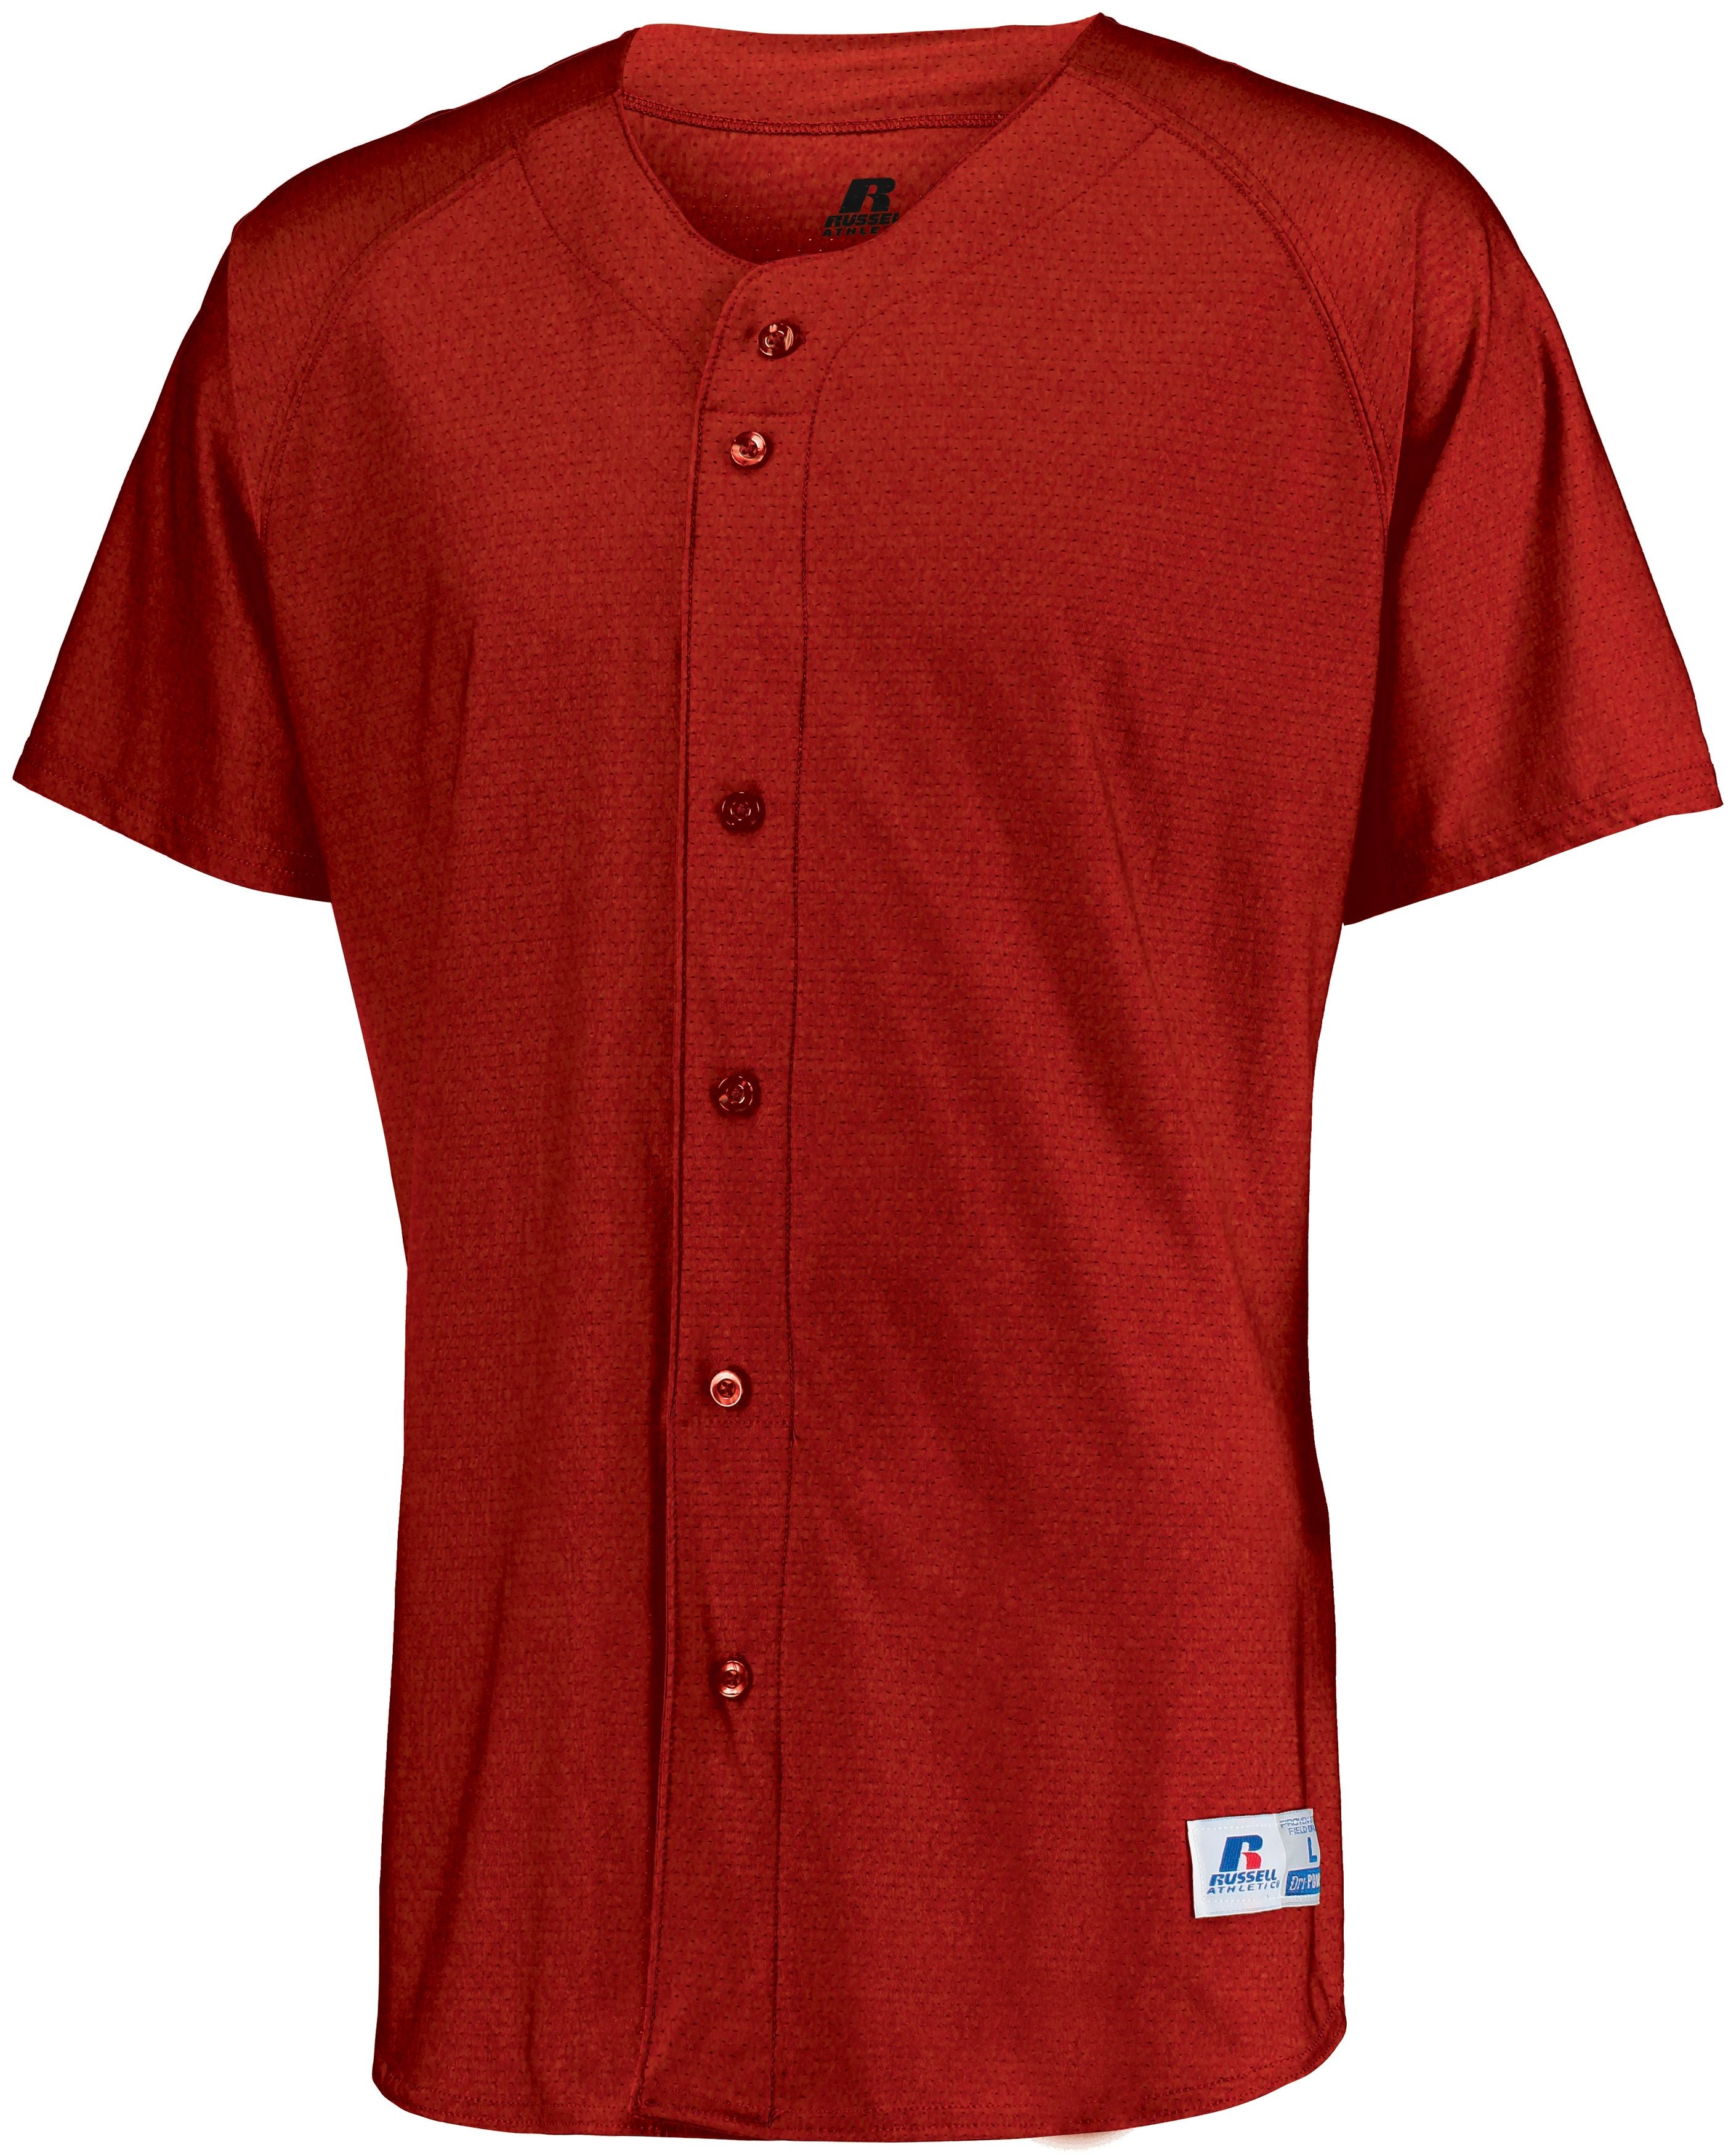 Russell Athletic Raglan Sleeve Button Front Jersey in True Red  -Part of the Adult, Adult-Jersey, Baseball, Russell-Athletic-Products, Shirts, All-Sports, All-Sports-1 product lines at KanaleyCreations.com